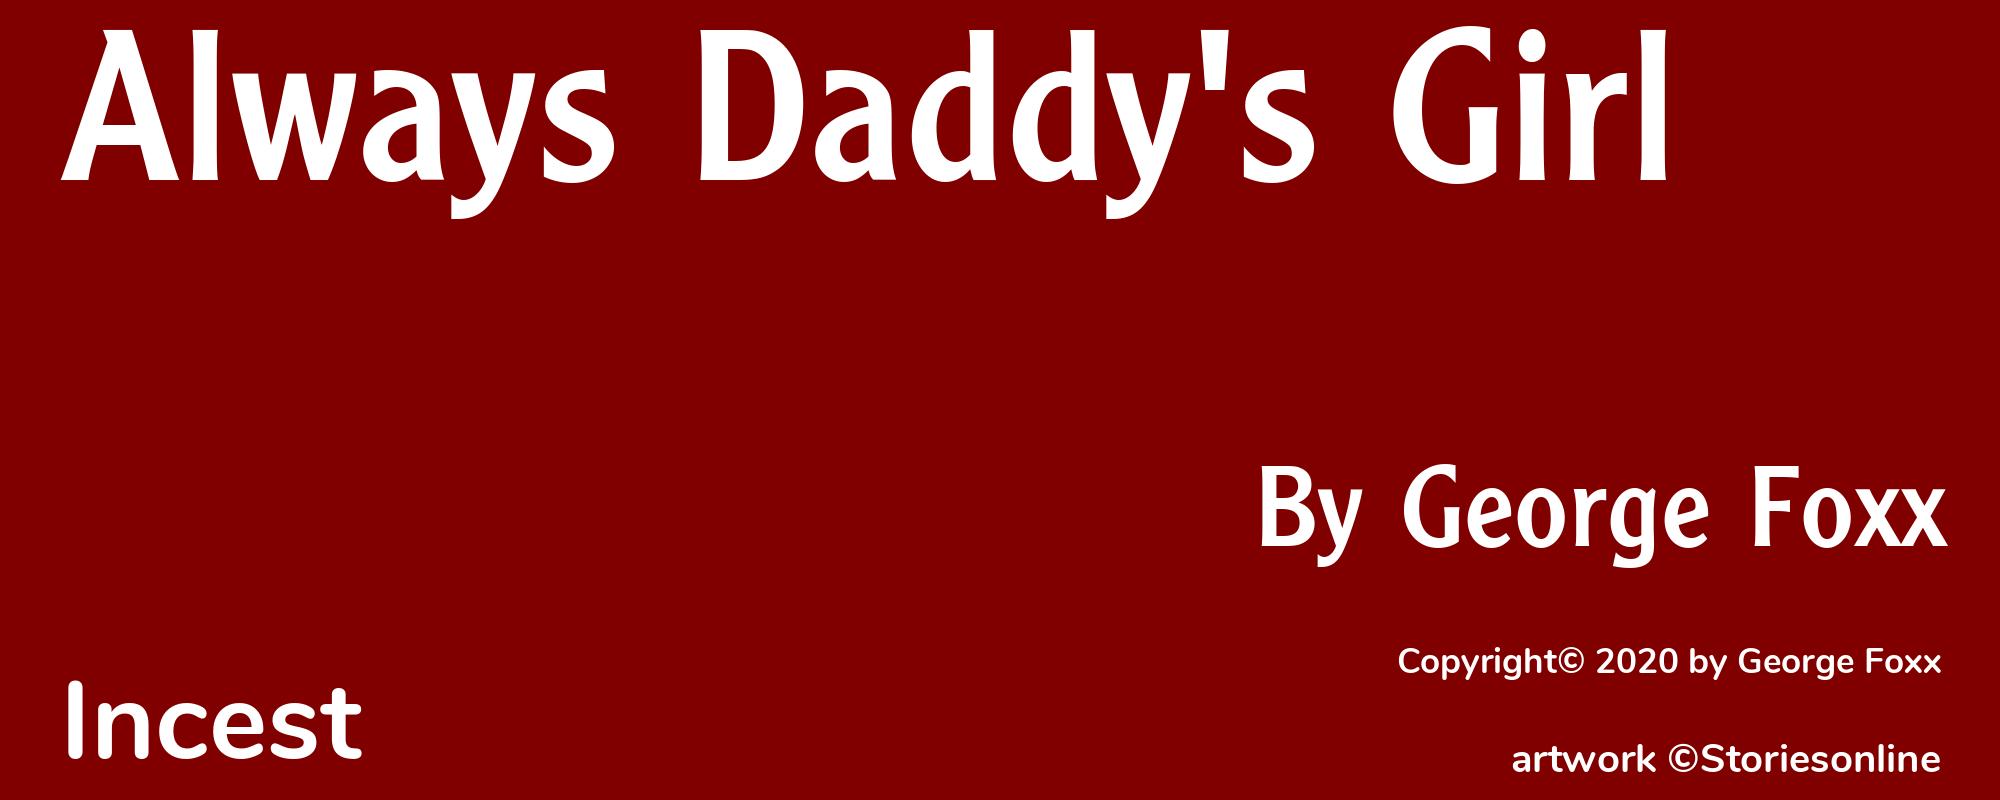 Always Daddy's Girl - Cover